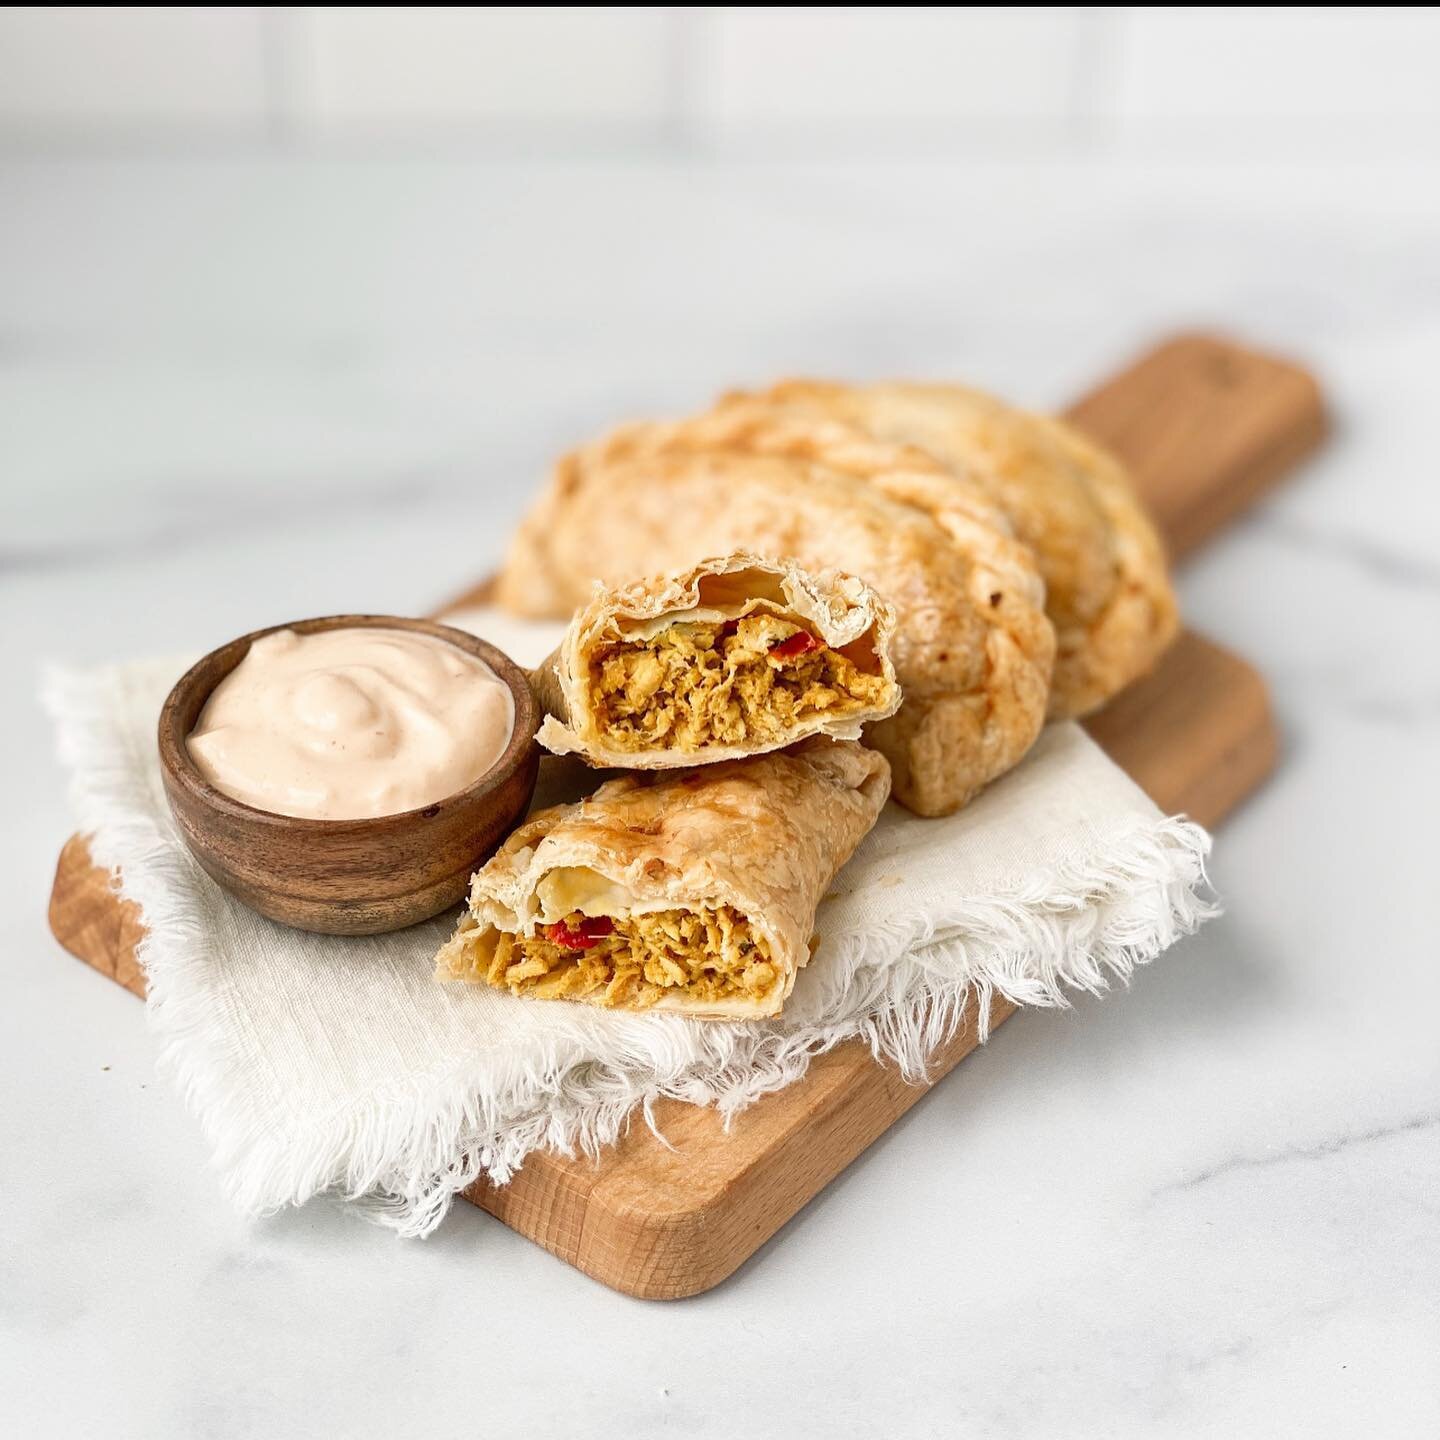 Our empanadas are inspired by travel and cultures from around the world. We firmly believe that you should work to live &amp; love to travel. Anthony Bourdain sums it up perfectly when he says, &ldquo;that without experimentation, a willingness to as